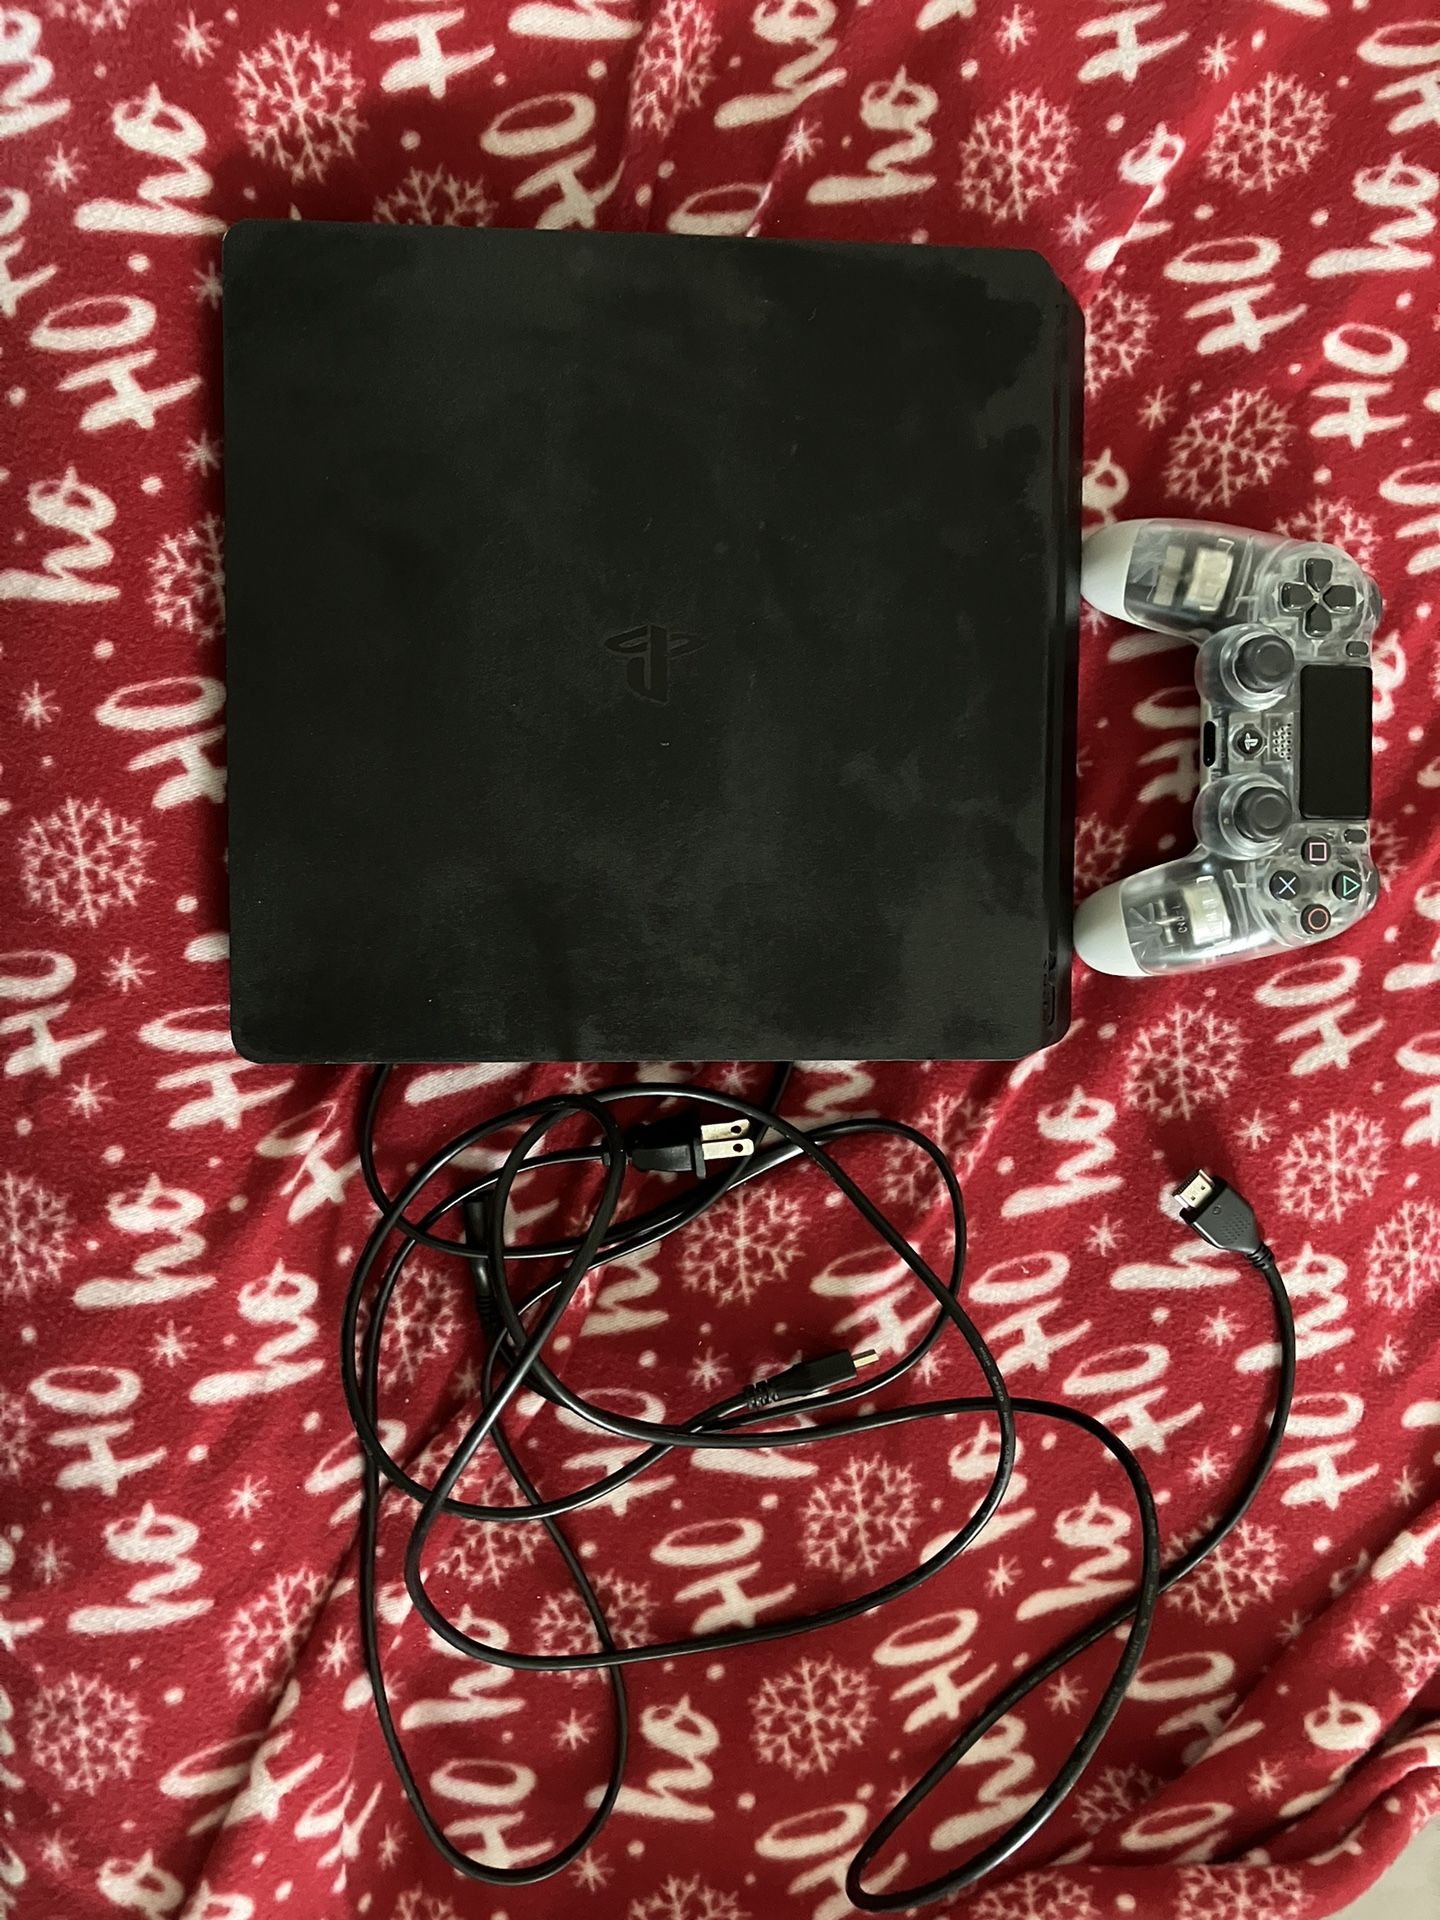 PS4 Slim With Controller 1tb & Cords